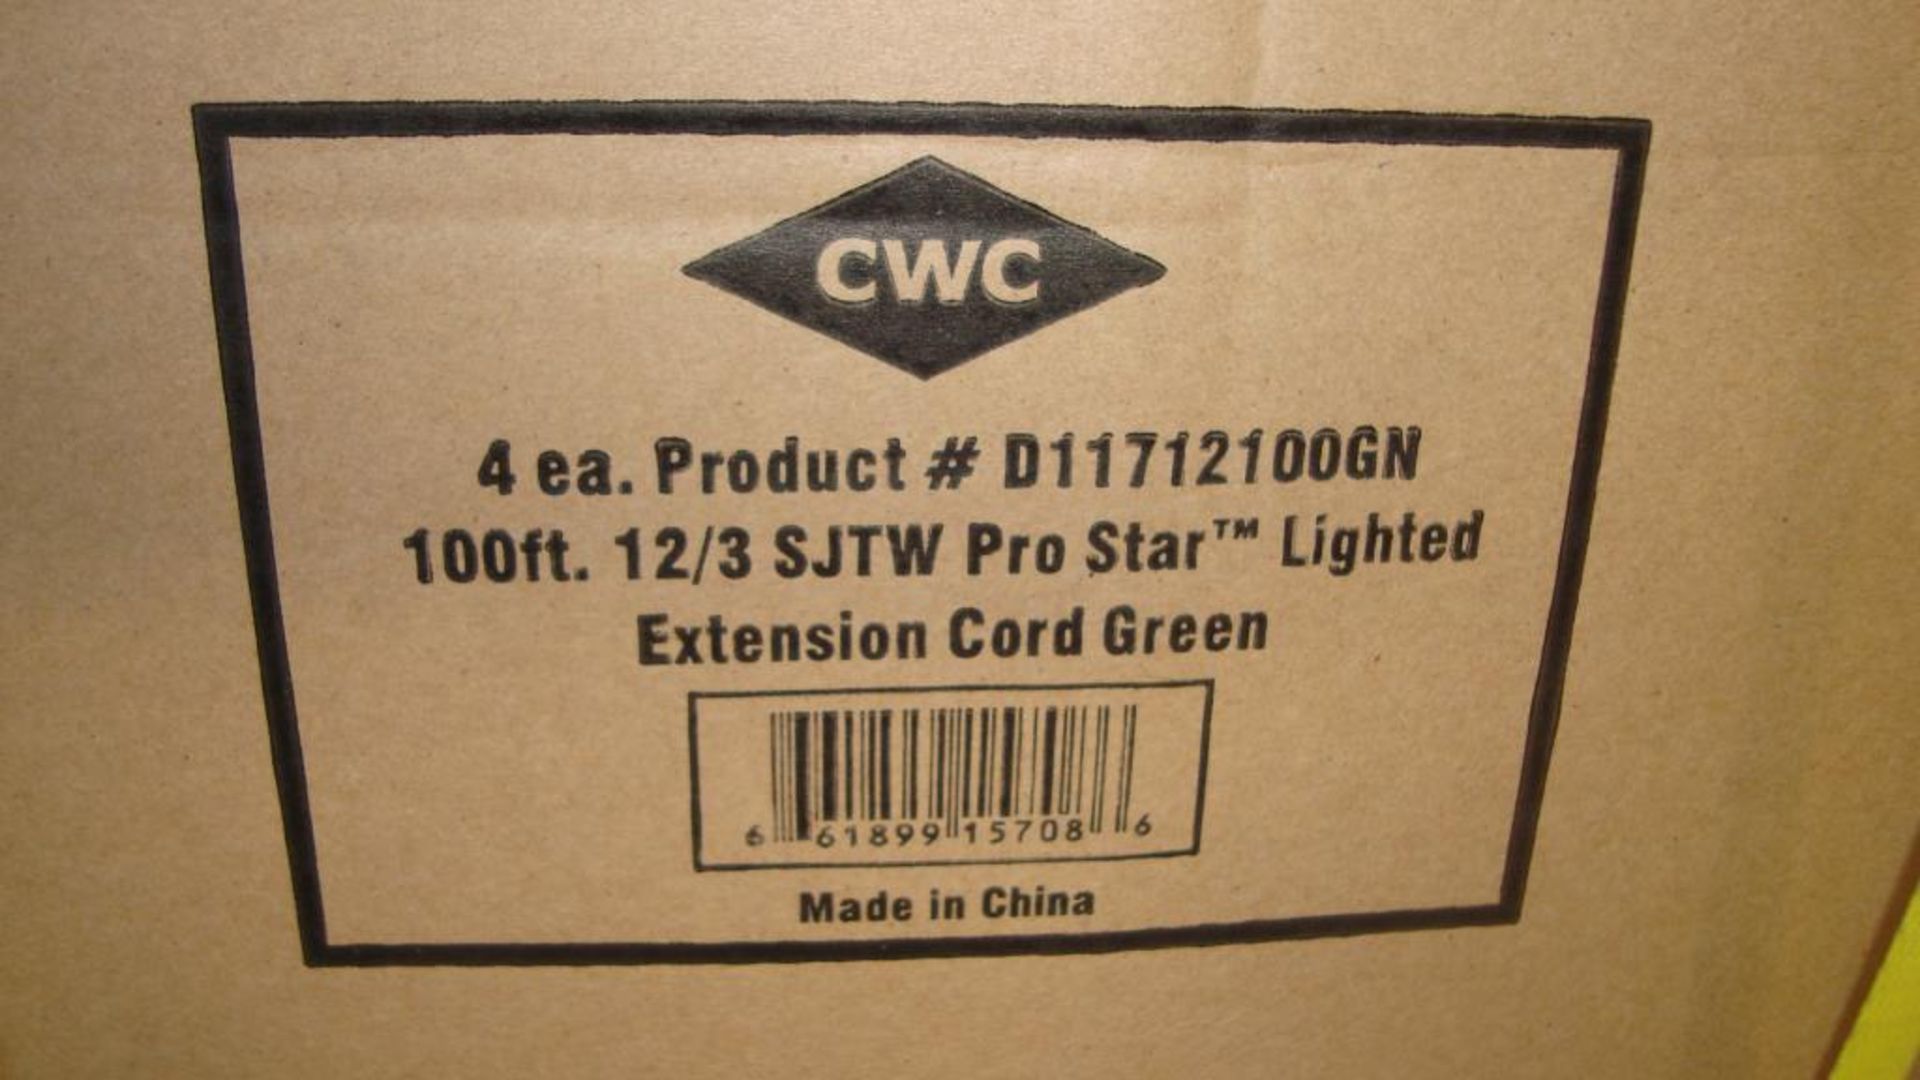 Extension Cords. Lot: 144 Total (36 Boxes - 4 ea.) Century Wire & Cable pn #D11712100GN Pro- Star - Image 5 of 8